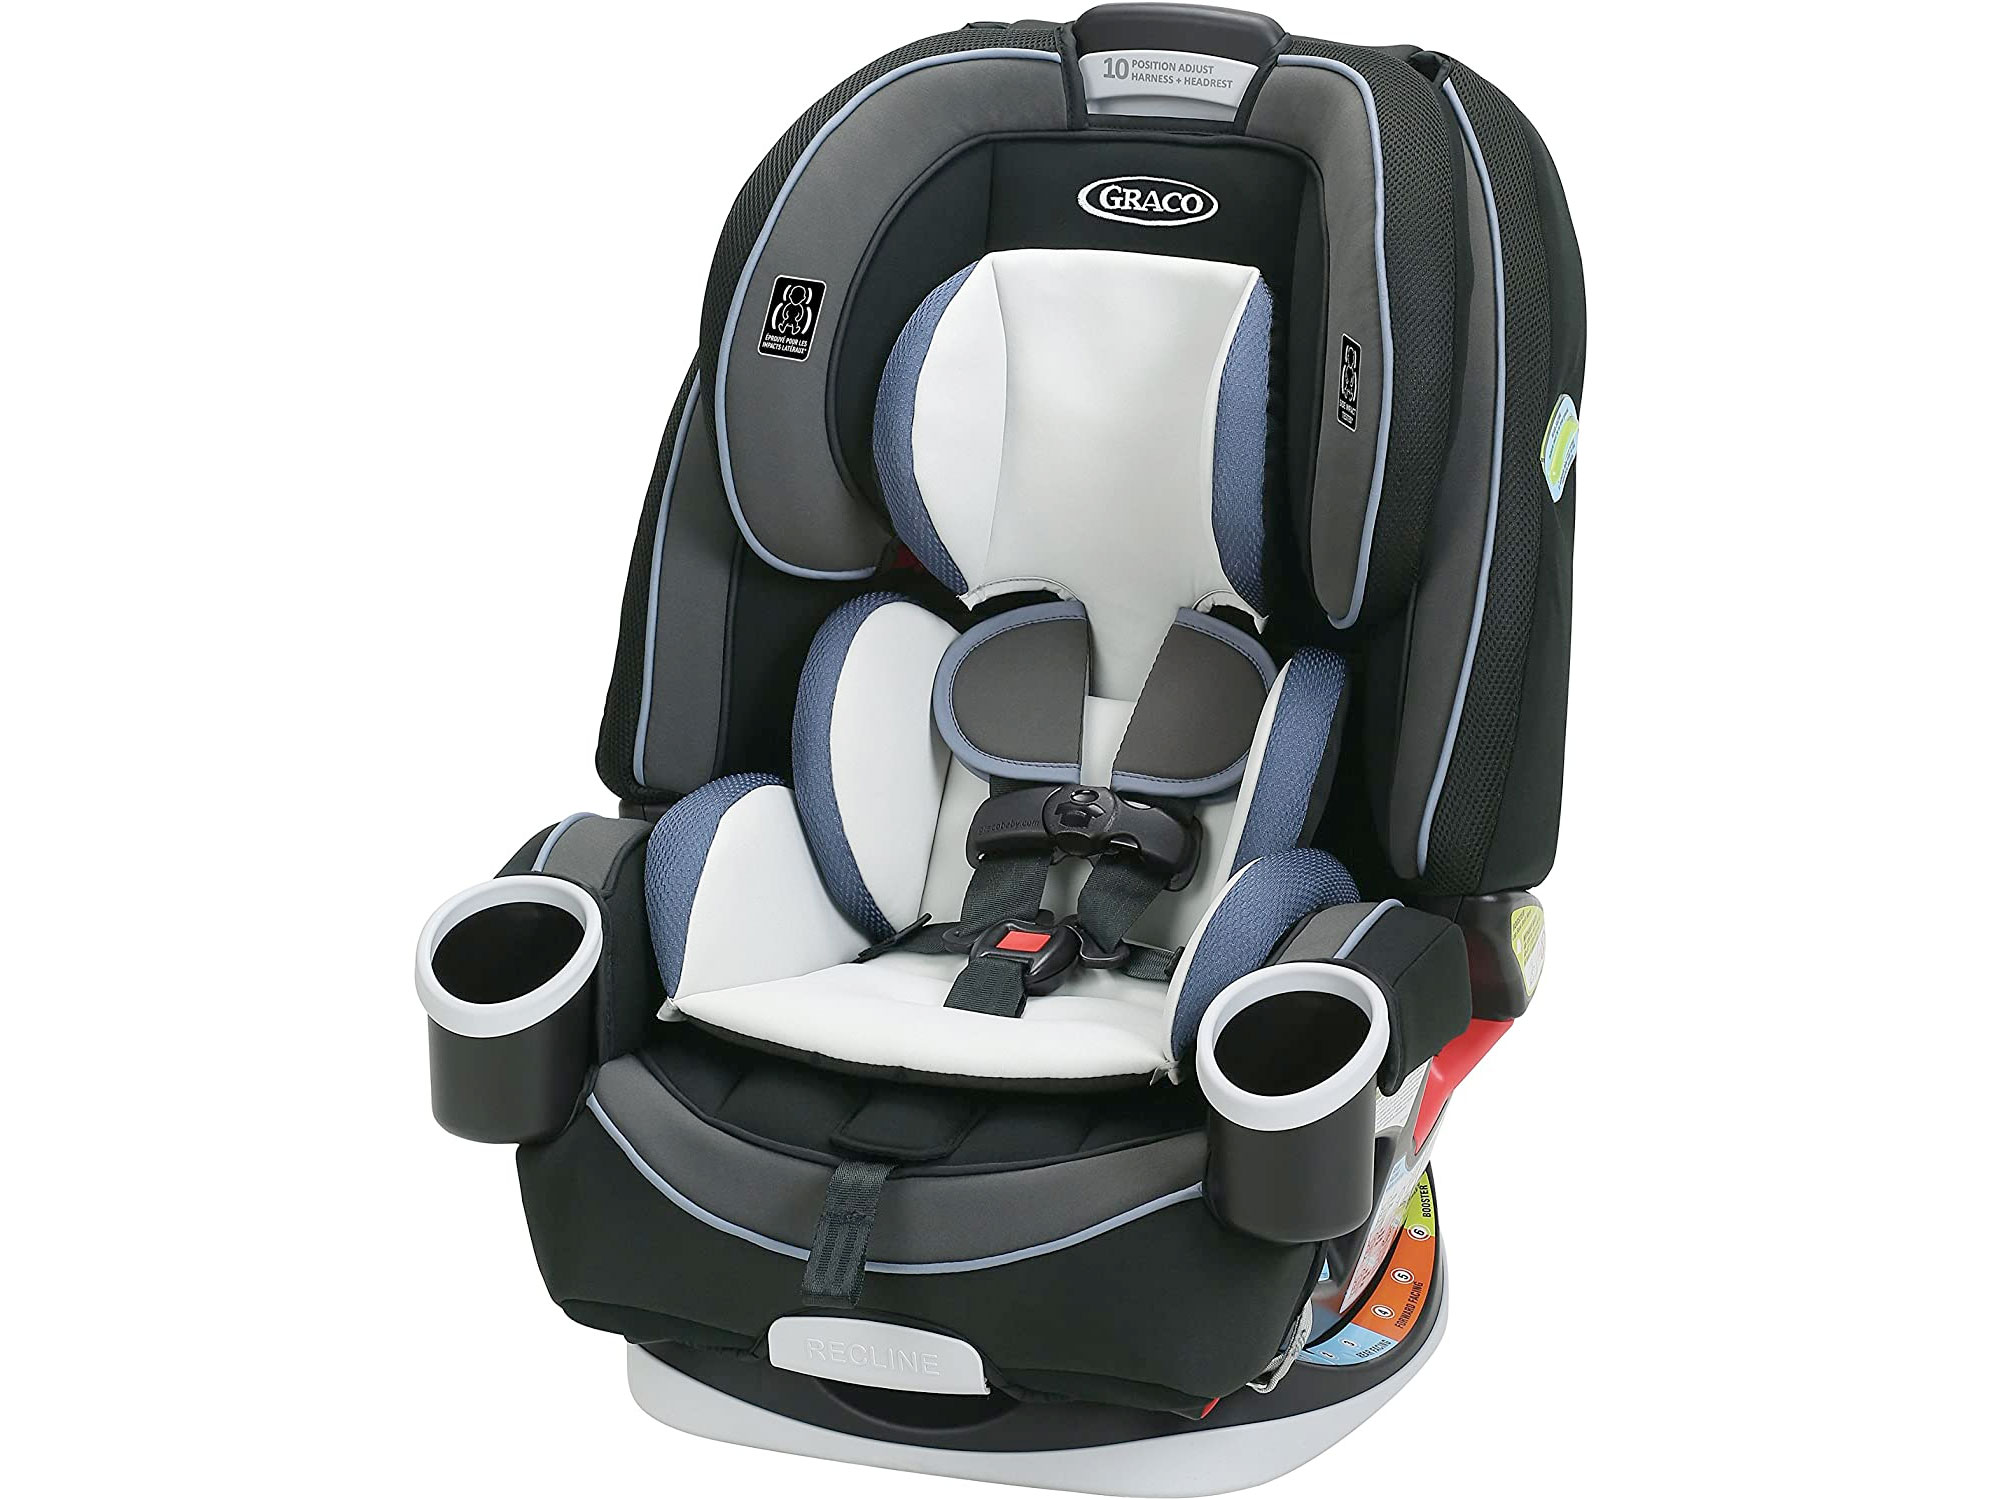 Amazon：Graco 4Ever All-in-1 Car Seat只卖$299